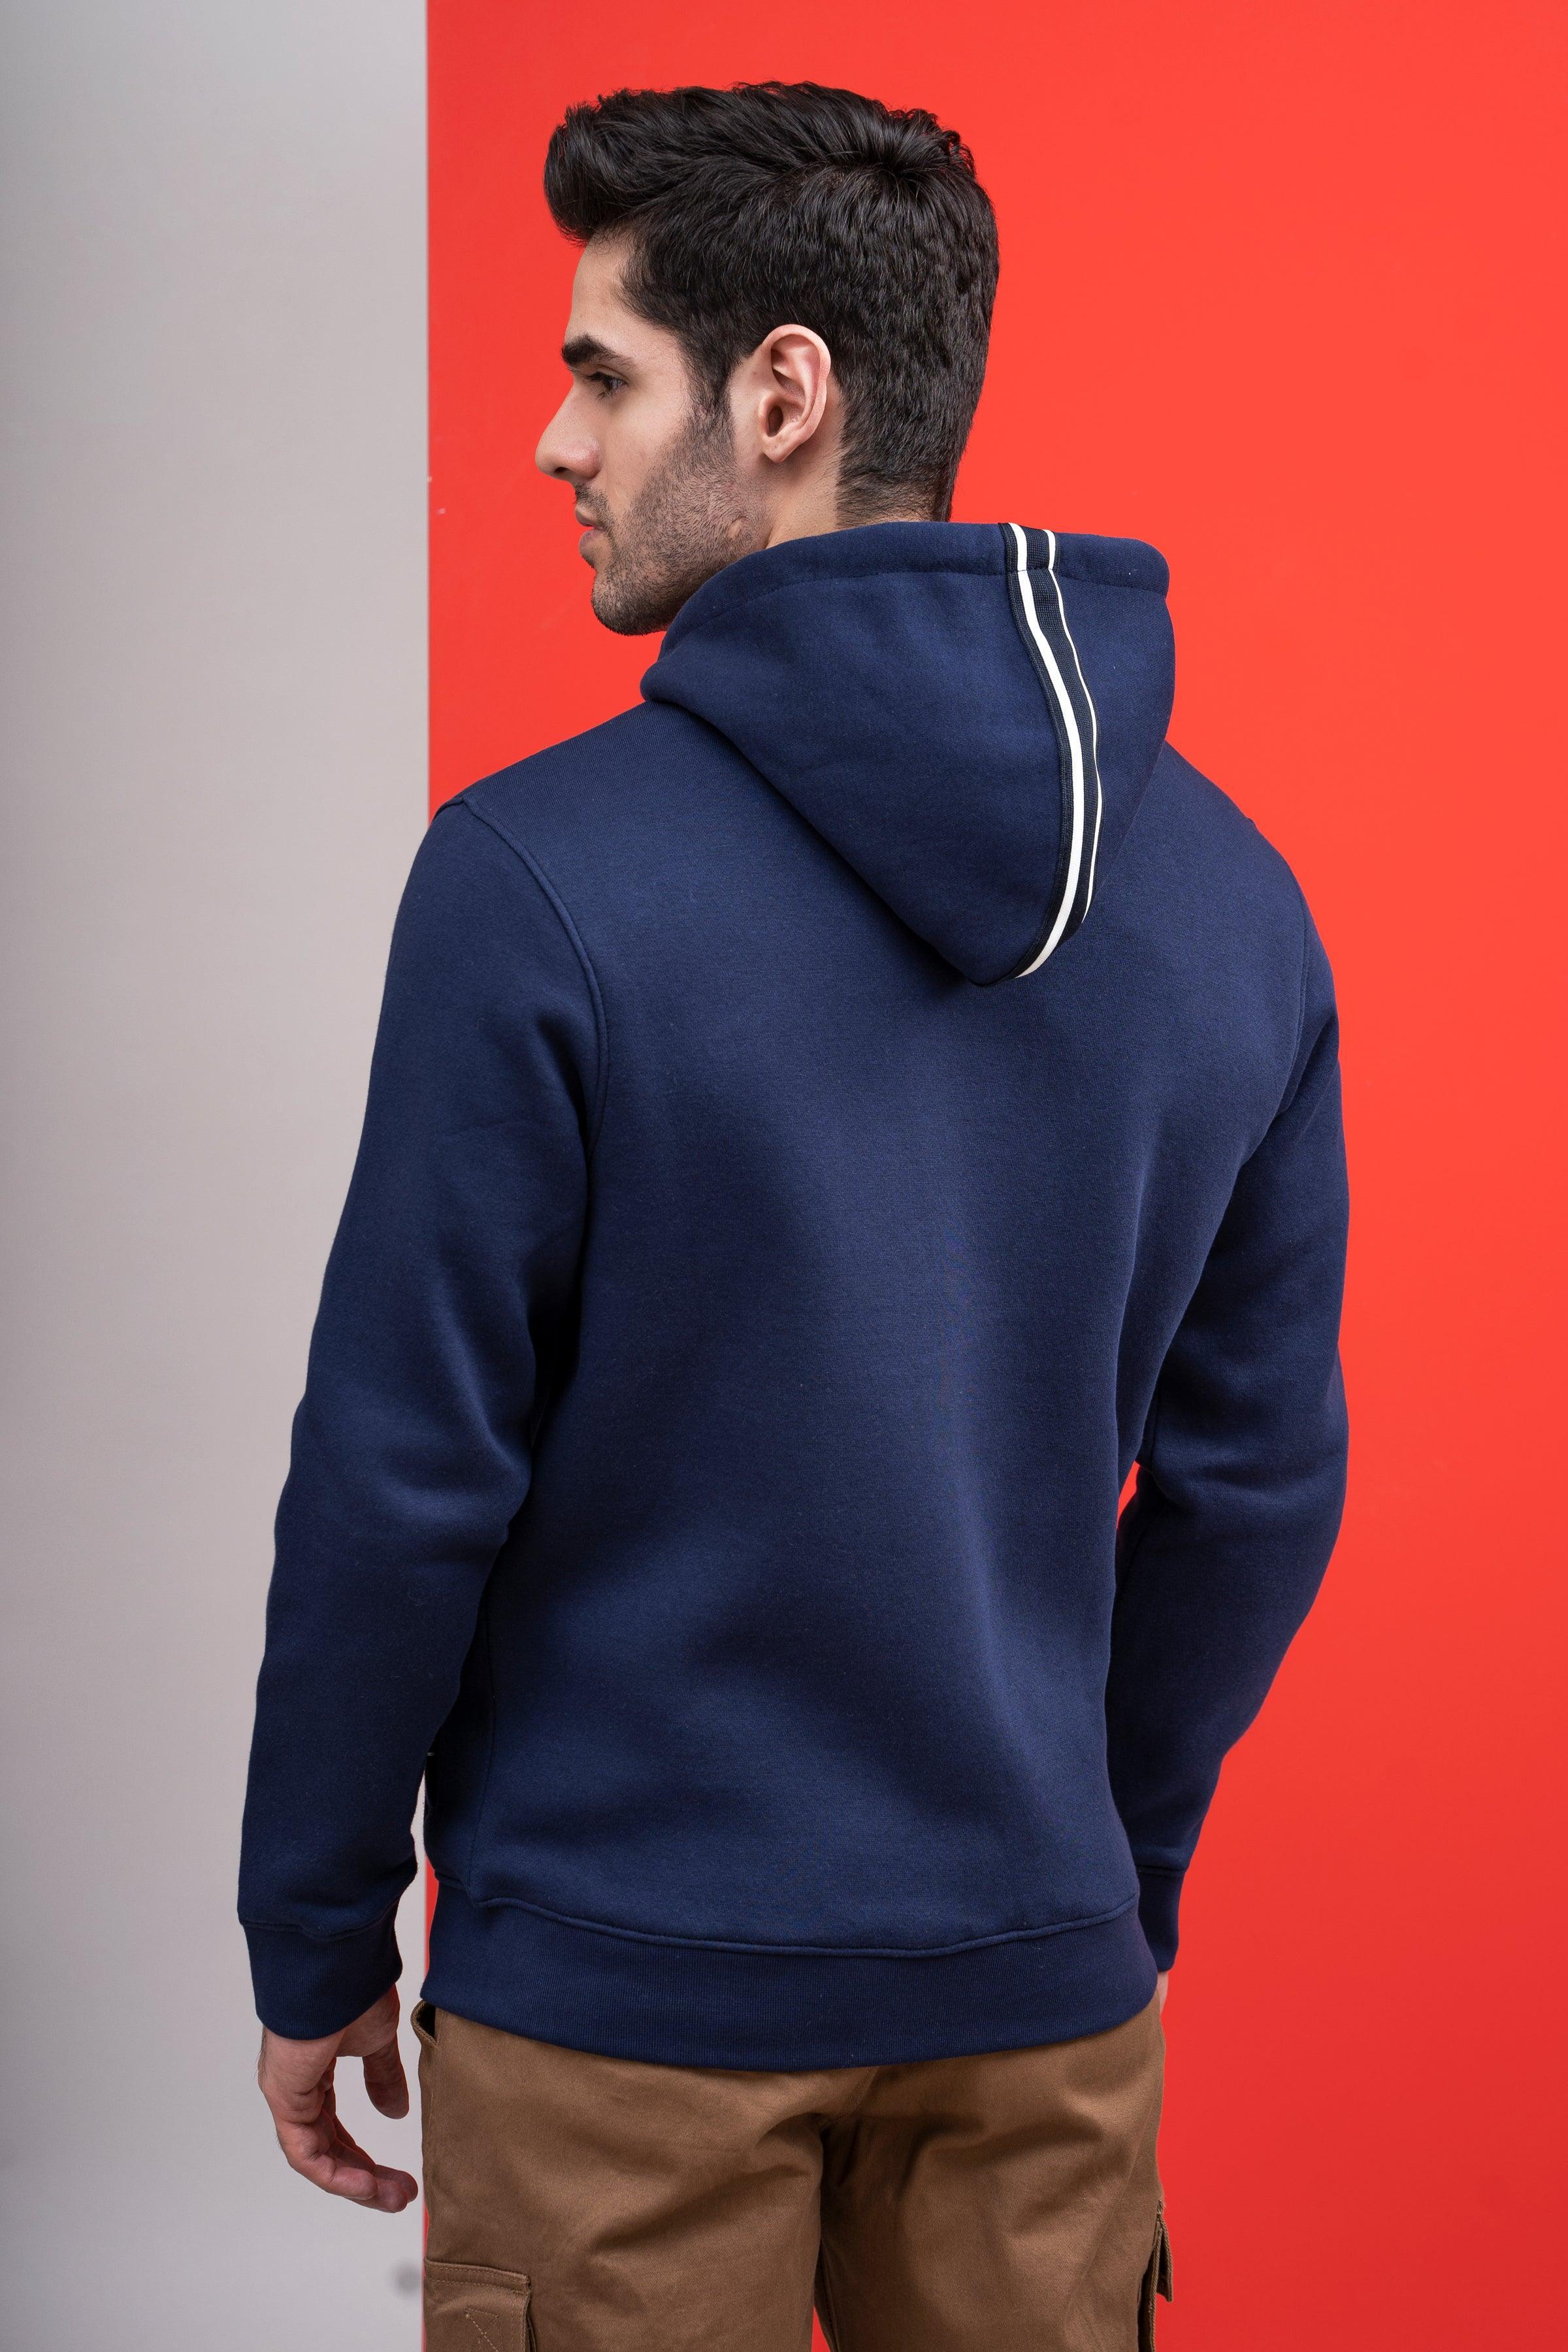 ZIPPER HOODIE FULL SLEEVE NAVY at Charcoal Clothing